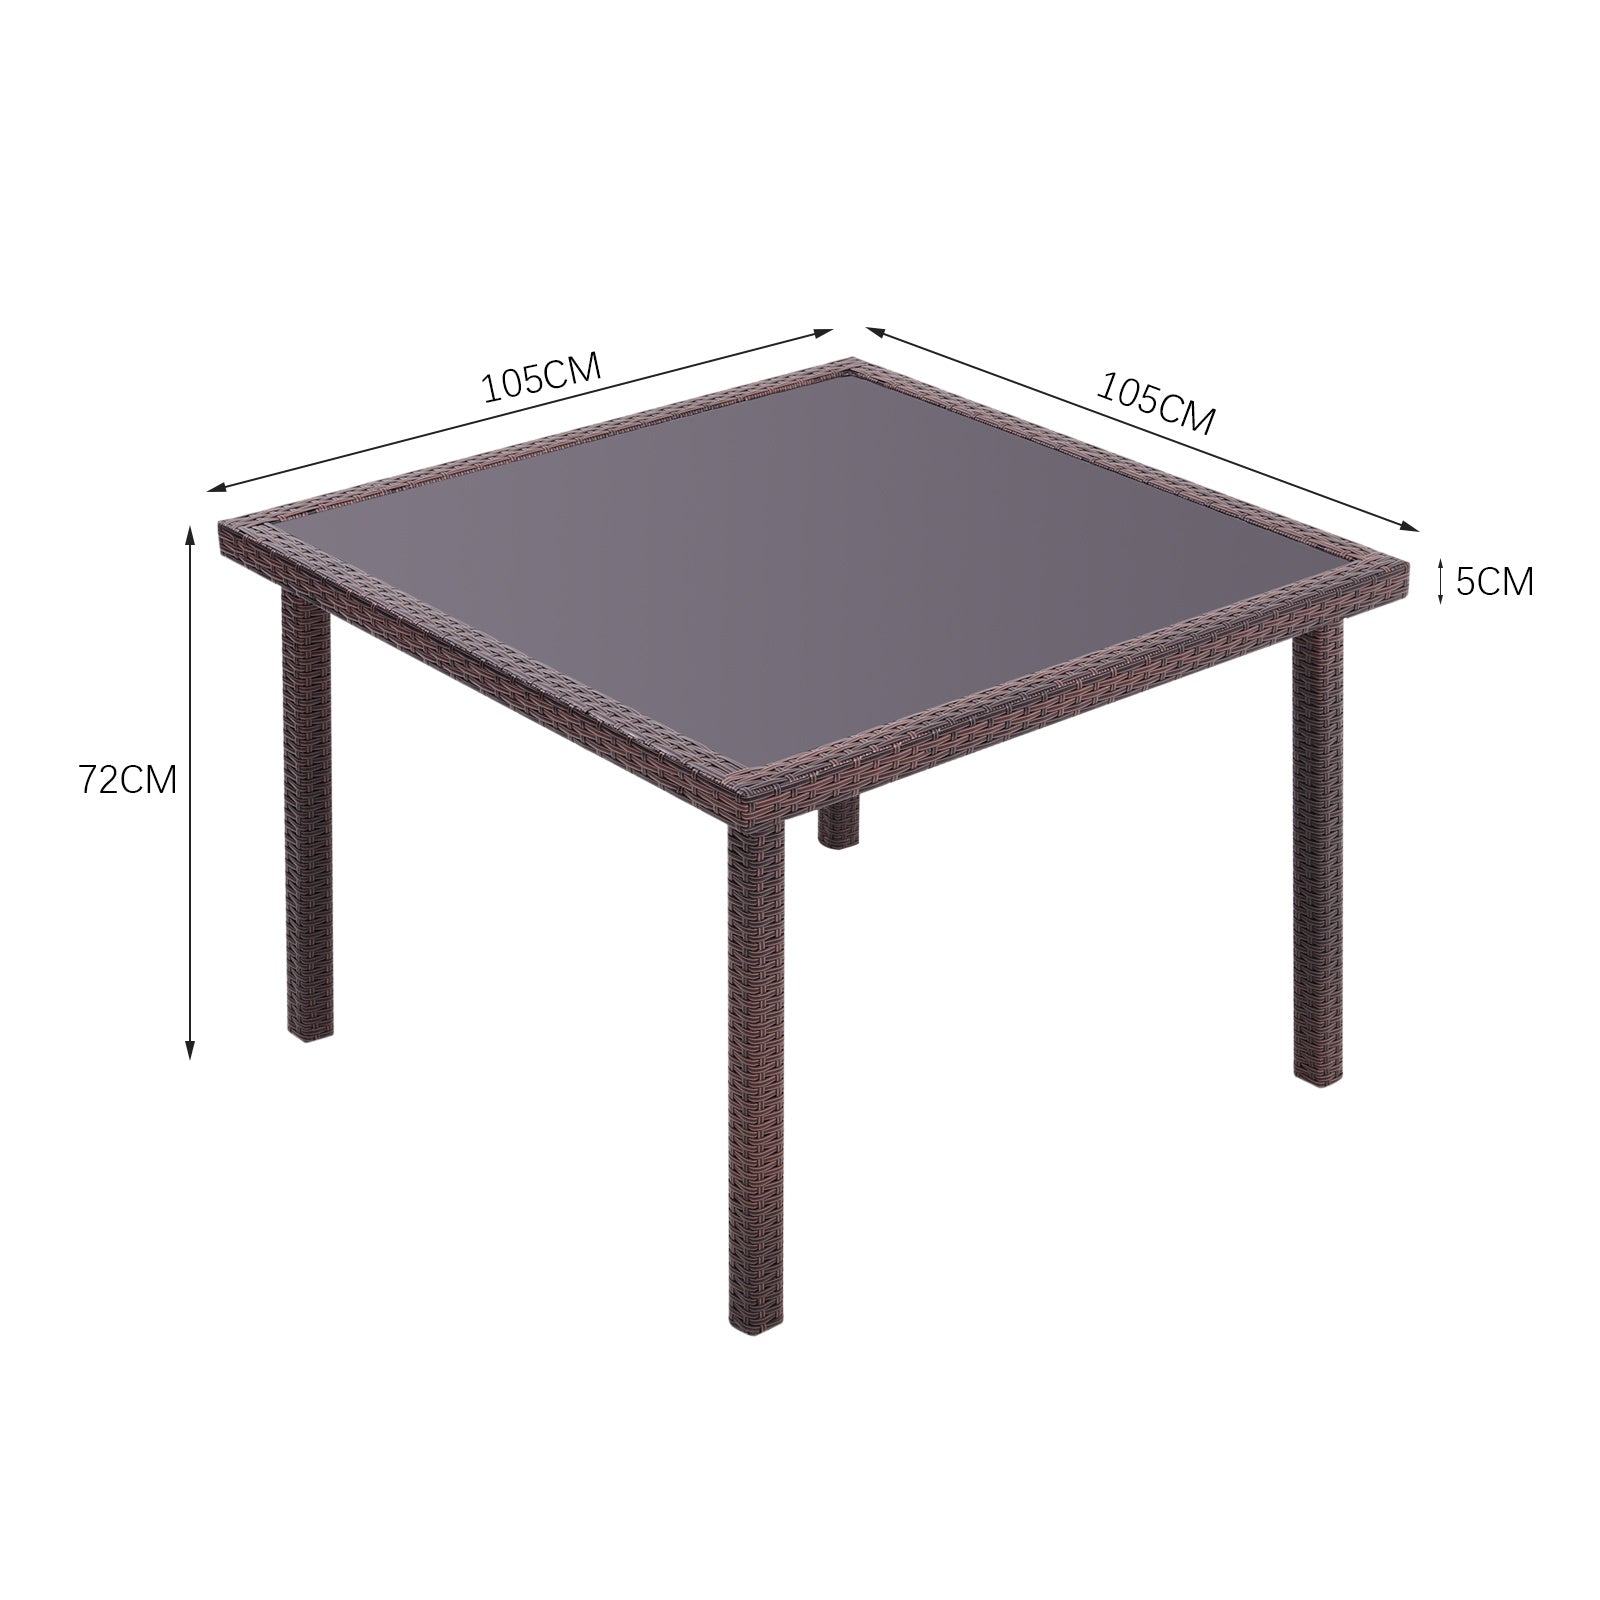 Garden Table Dining Patio Outdoor Table Black/Brown Garden Dining Table Living and Home H72 * W105 * D105 cm Brown 